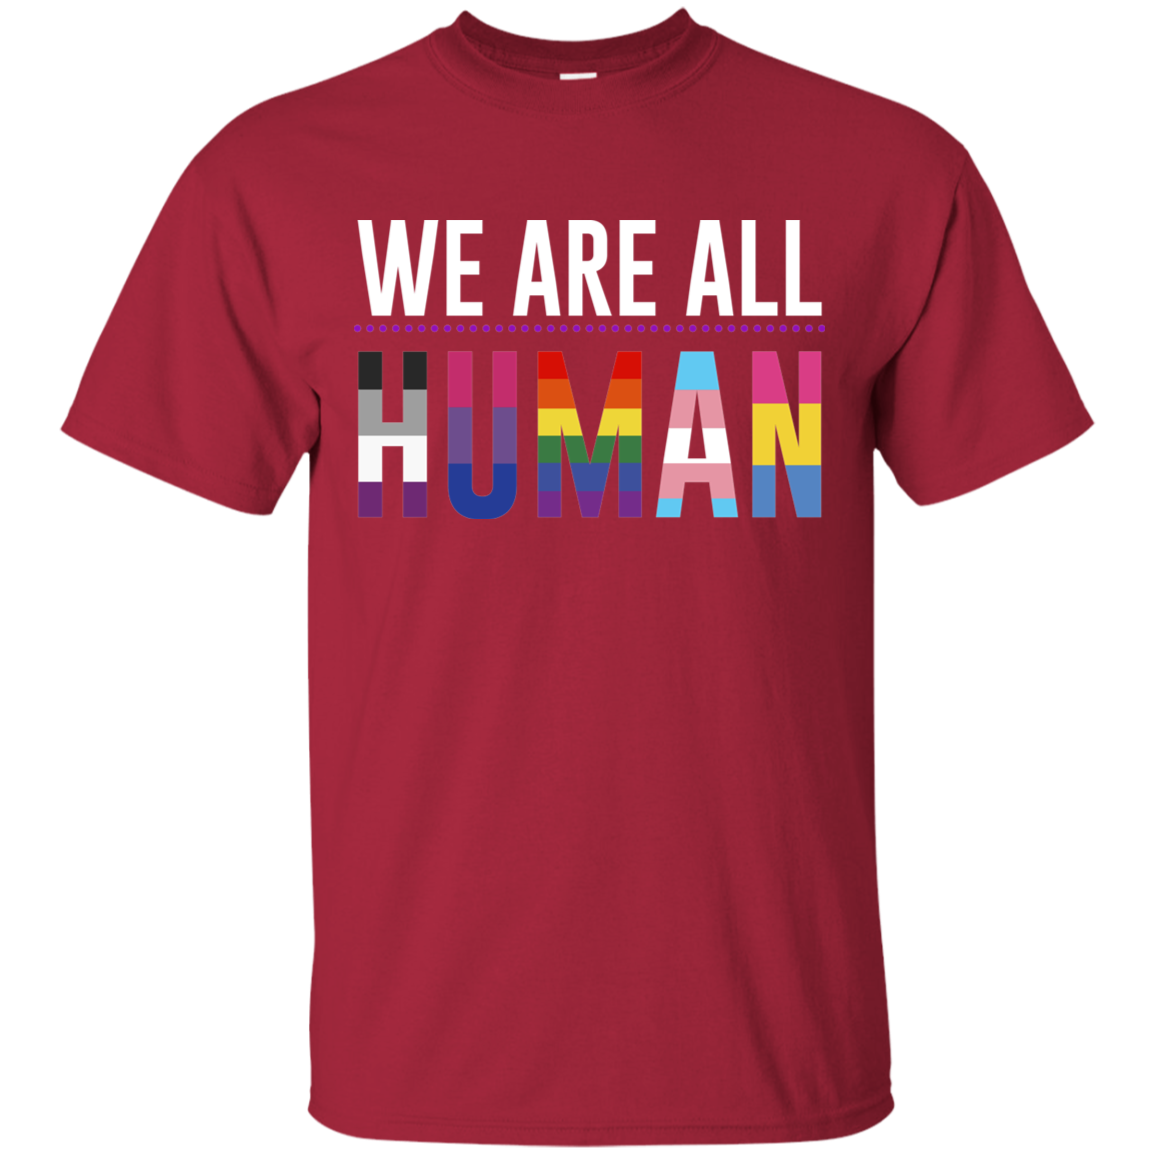 We Are All Human maroon T Shirt for men, half sleeves round neck tshirt for men